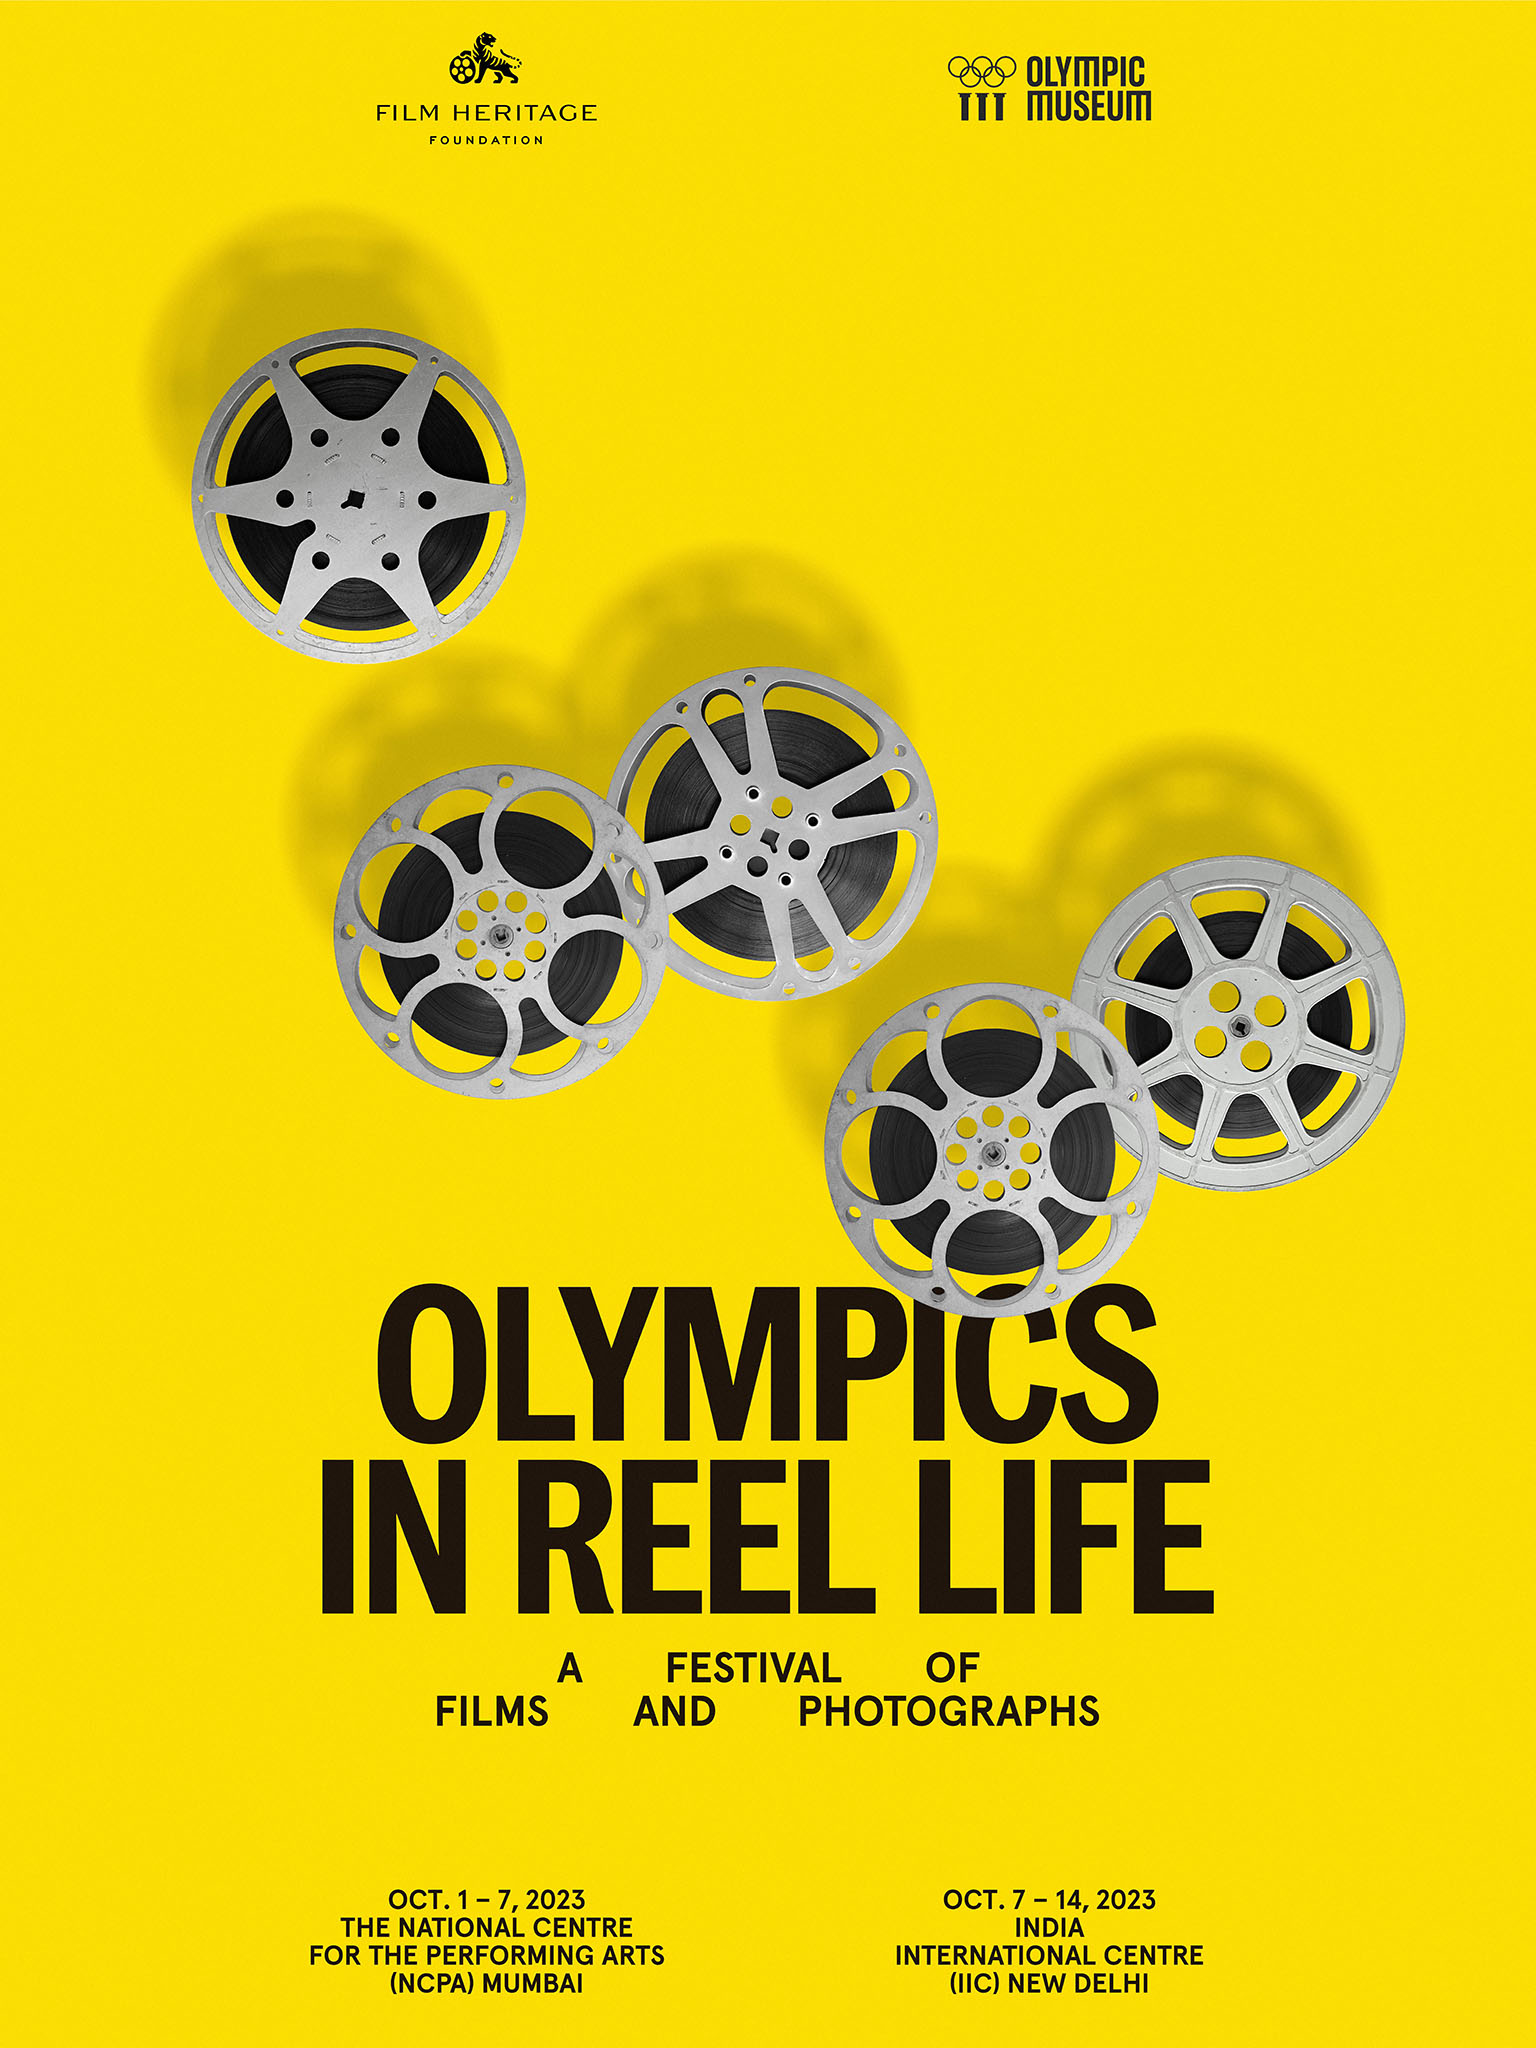 Olympics in Reel Life - A Festival of Films and Photographs: Presented by  Film Heritage Foundation in partnership with the Olympic Museum - Film  Heritage Foundation